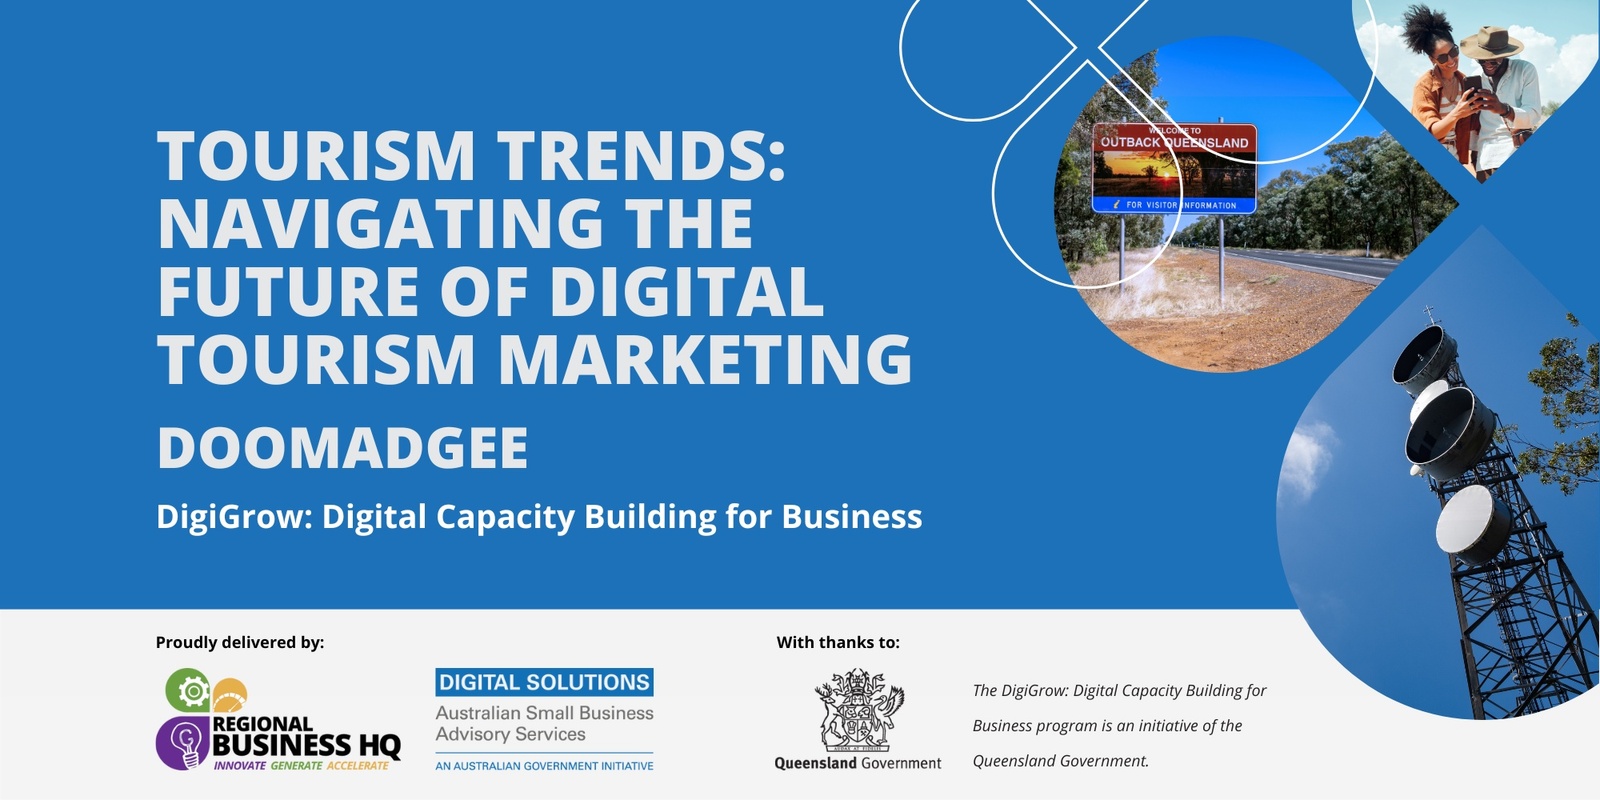 Banner image for Tourism Trends: Navigating the Future of Digital Tourism Marketing - Doomadgee